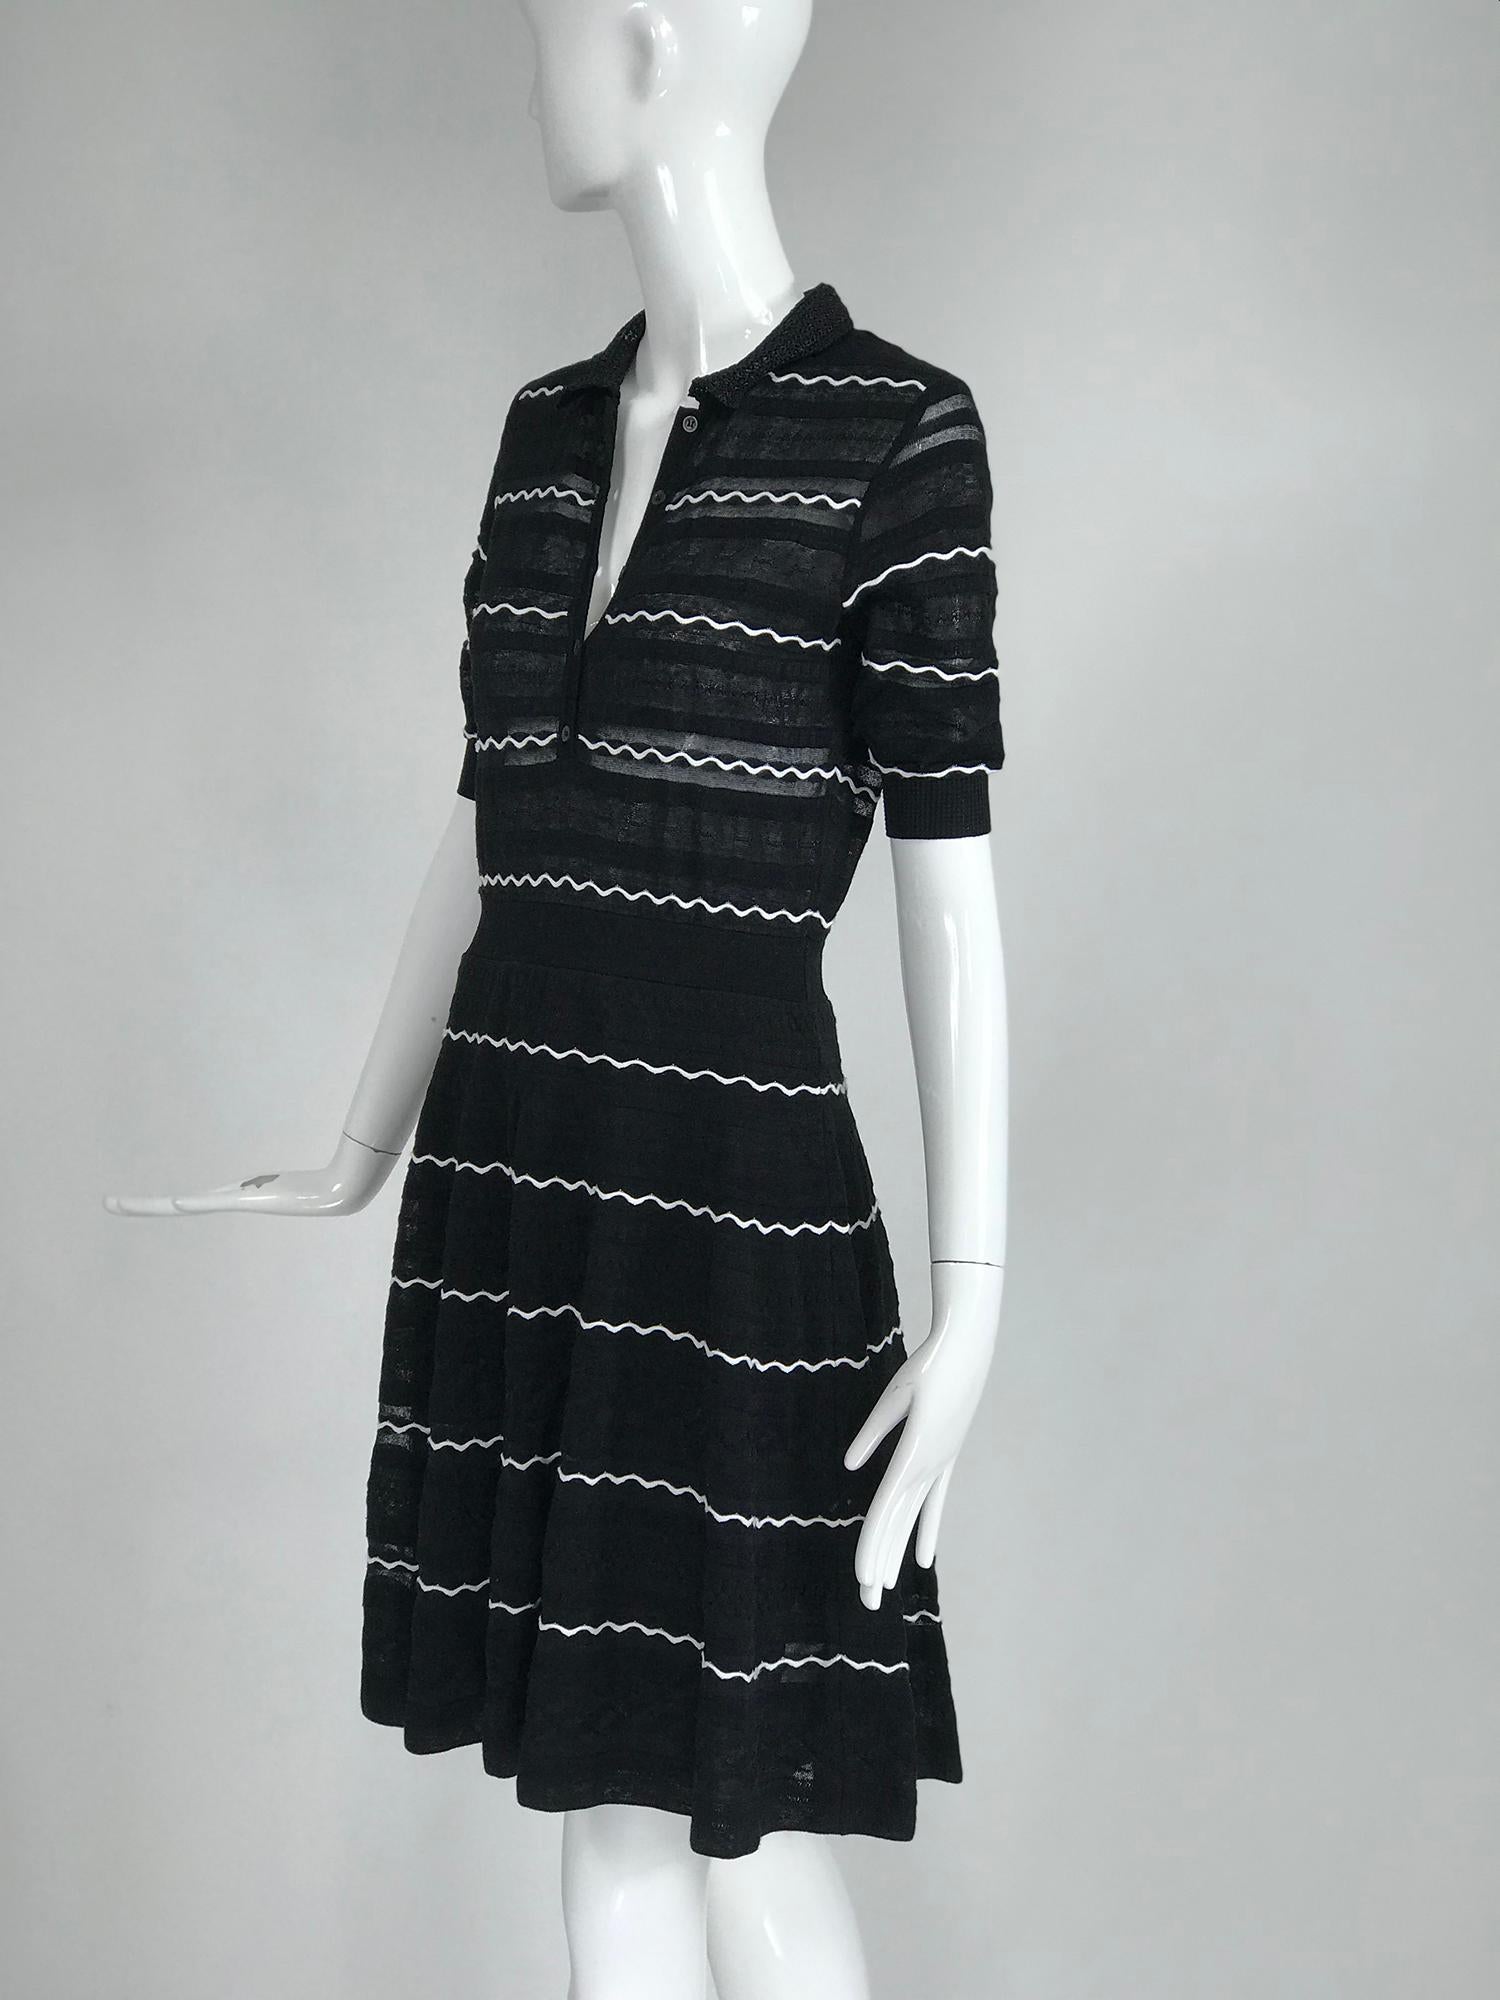 Missoni black and white fit and flare polo dress. Pull on dress with short ribbed cuff sleeves, the dress has a collar and button placket front, the waist has a knit band and the skirt flares to the hem. Black knit with a wavy knit white line, The